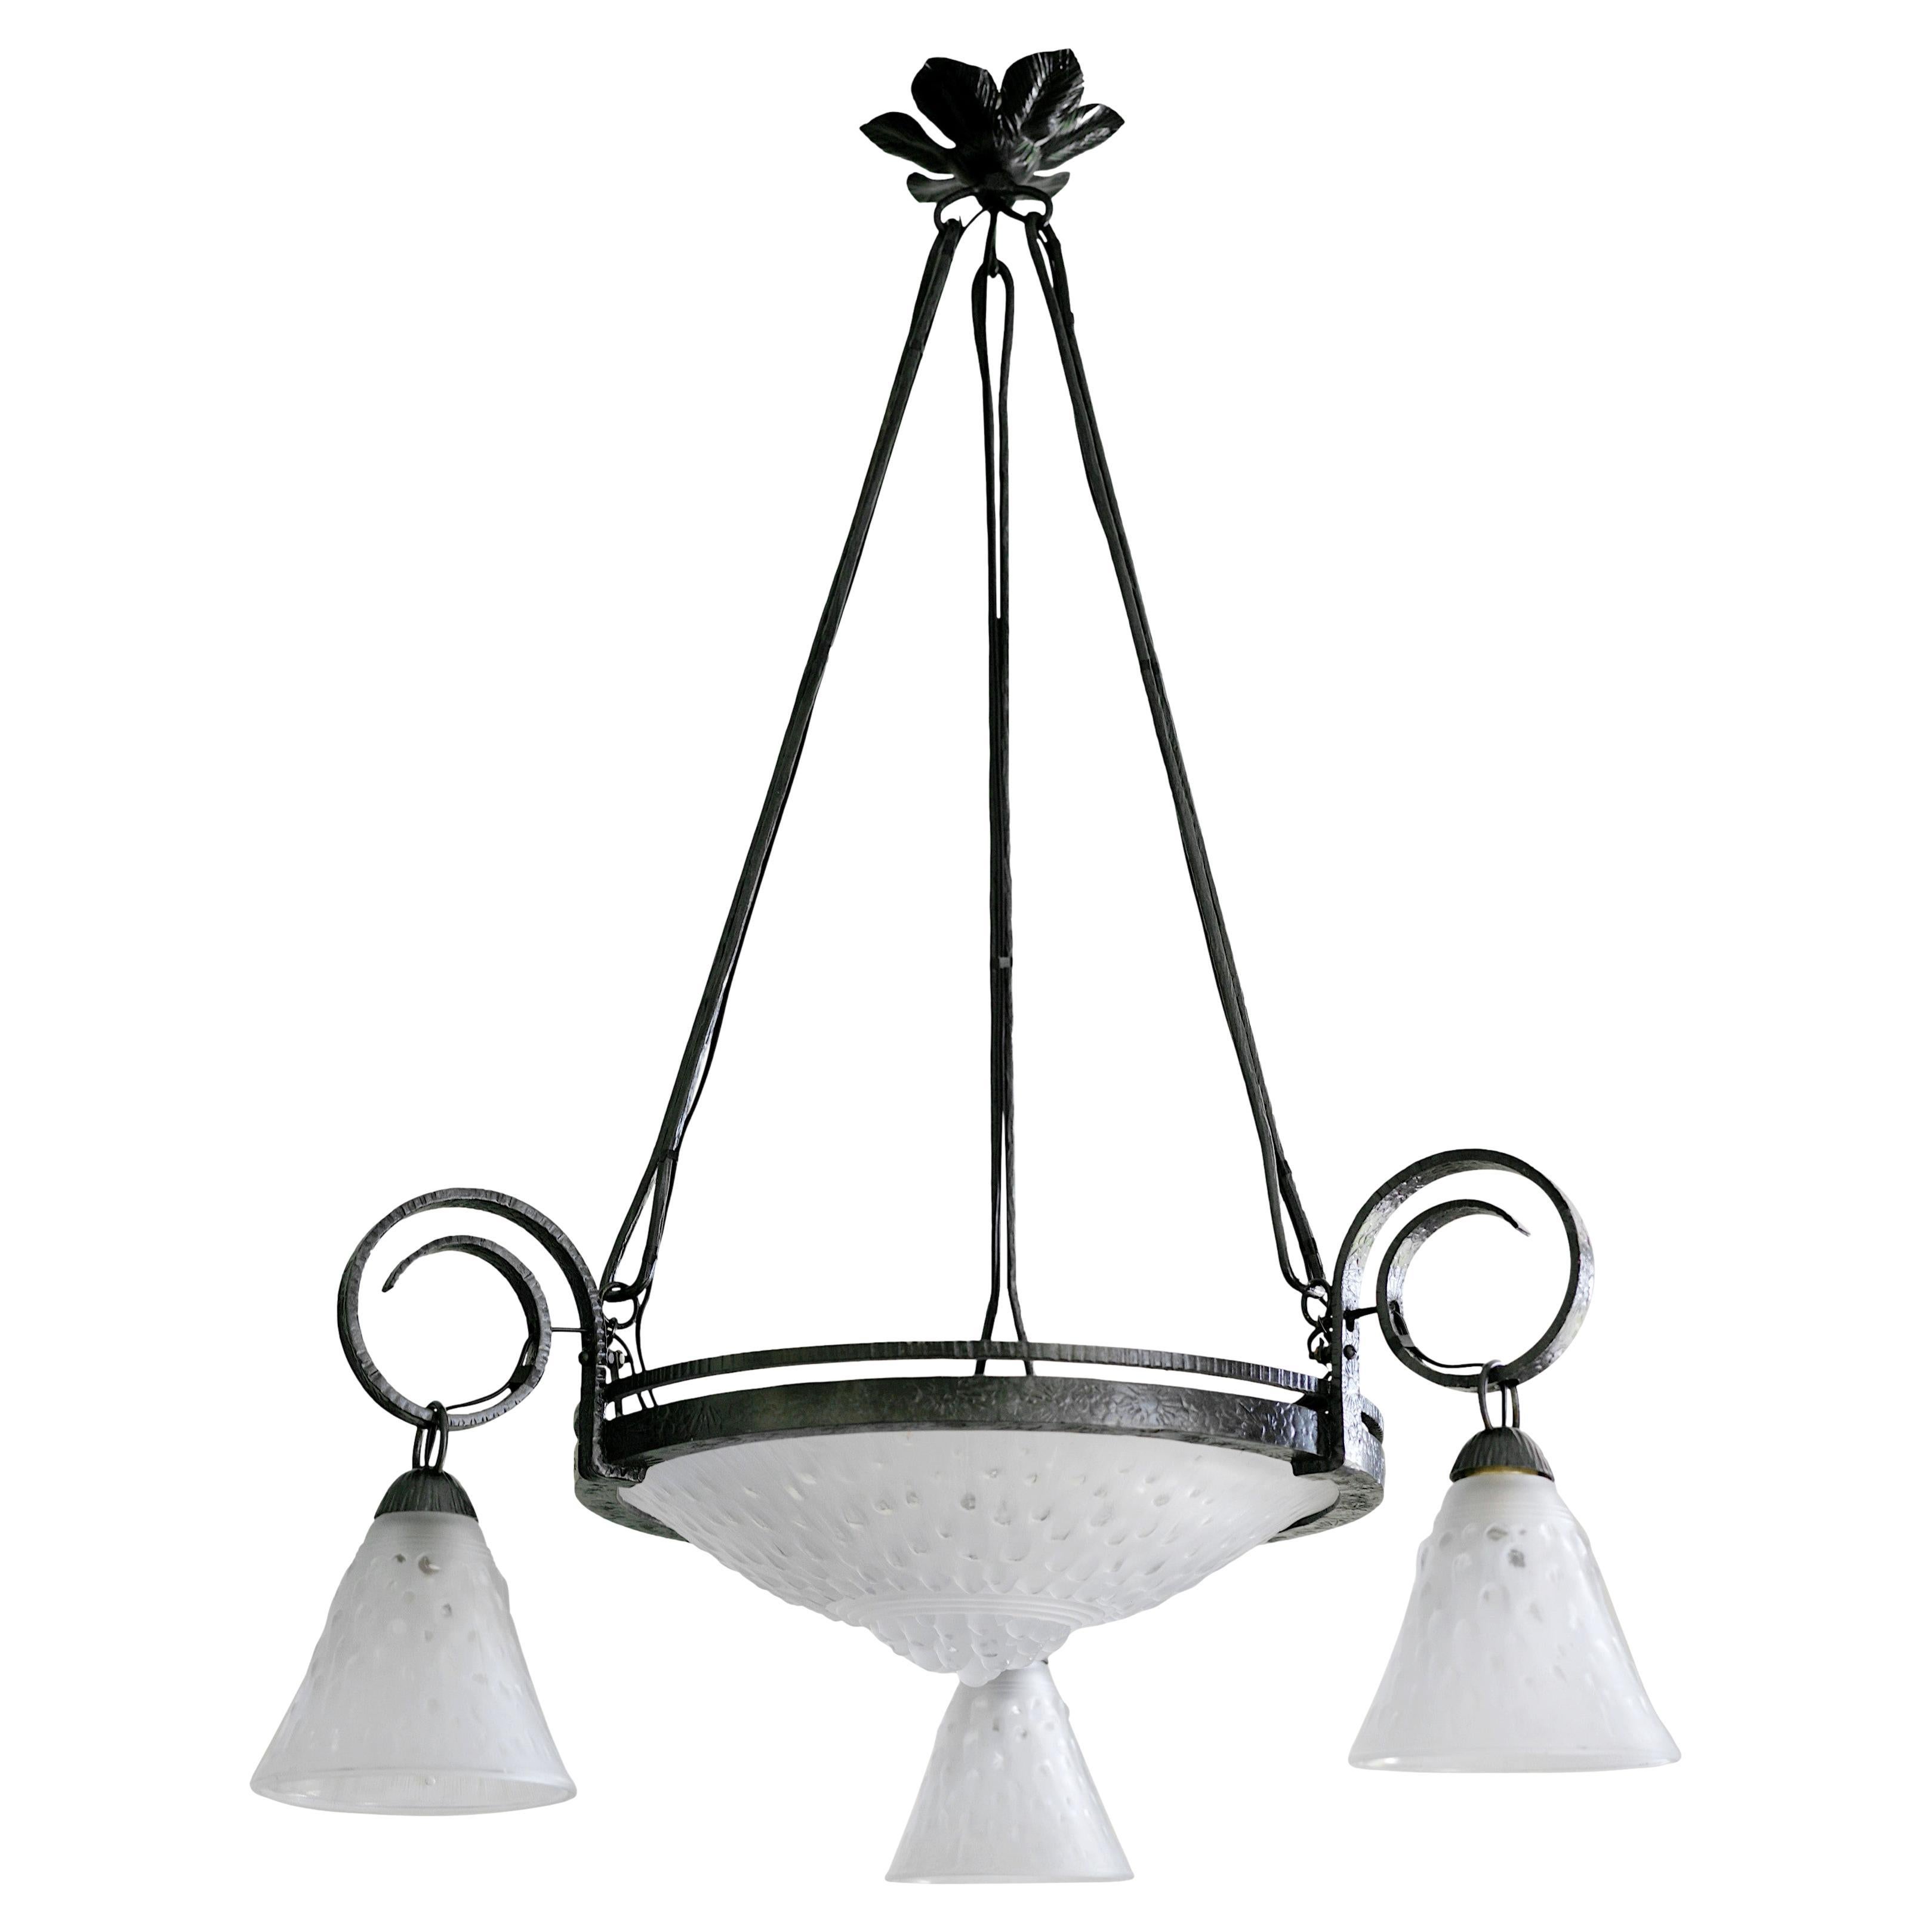 French Art Deco chandelier by MULLER FRERES (Luneville), France, ca.1925. Glass and wrought-iron. Thick frosted glass shades hung at their wrought-iron fixture. Rain model. Height : 34